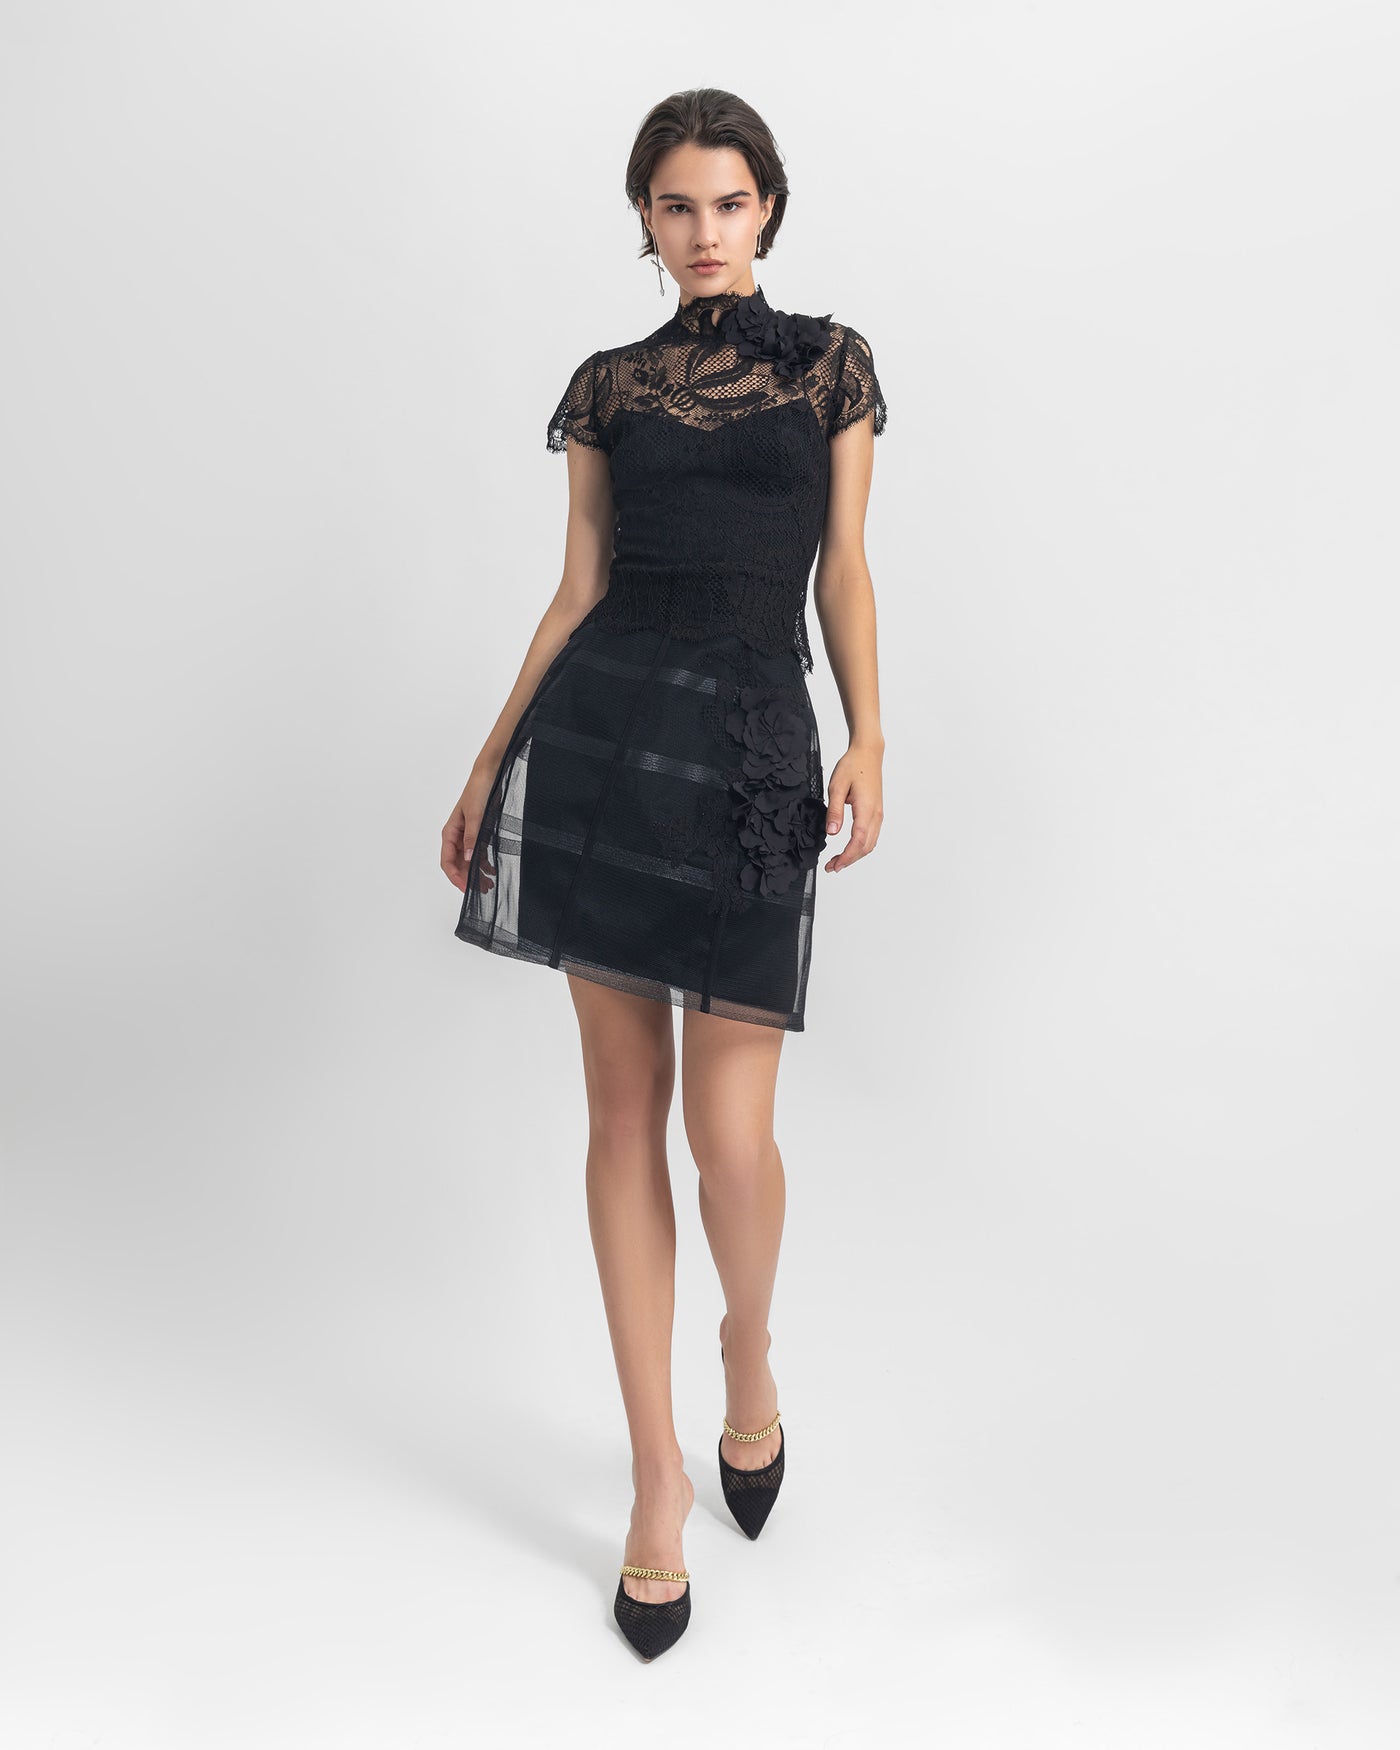 Lace Top & Cage-Like Skirt